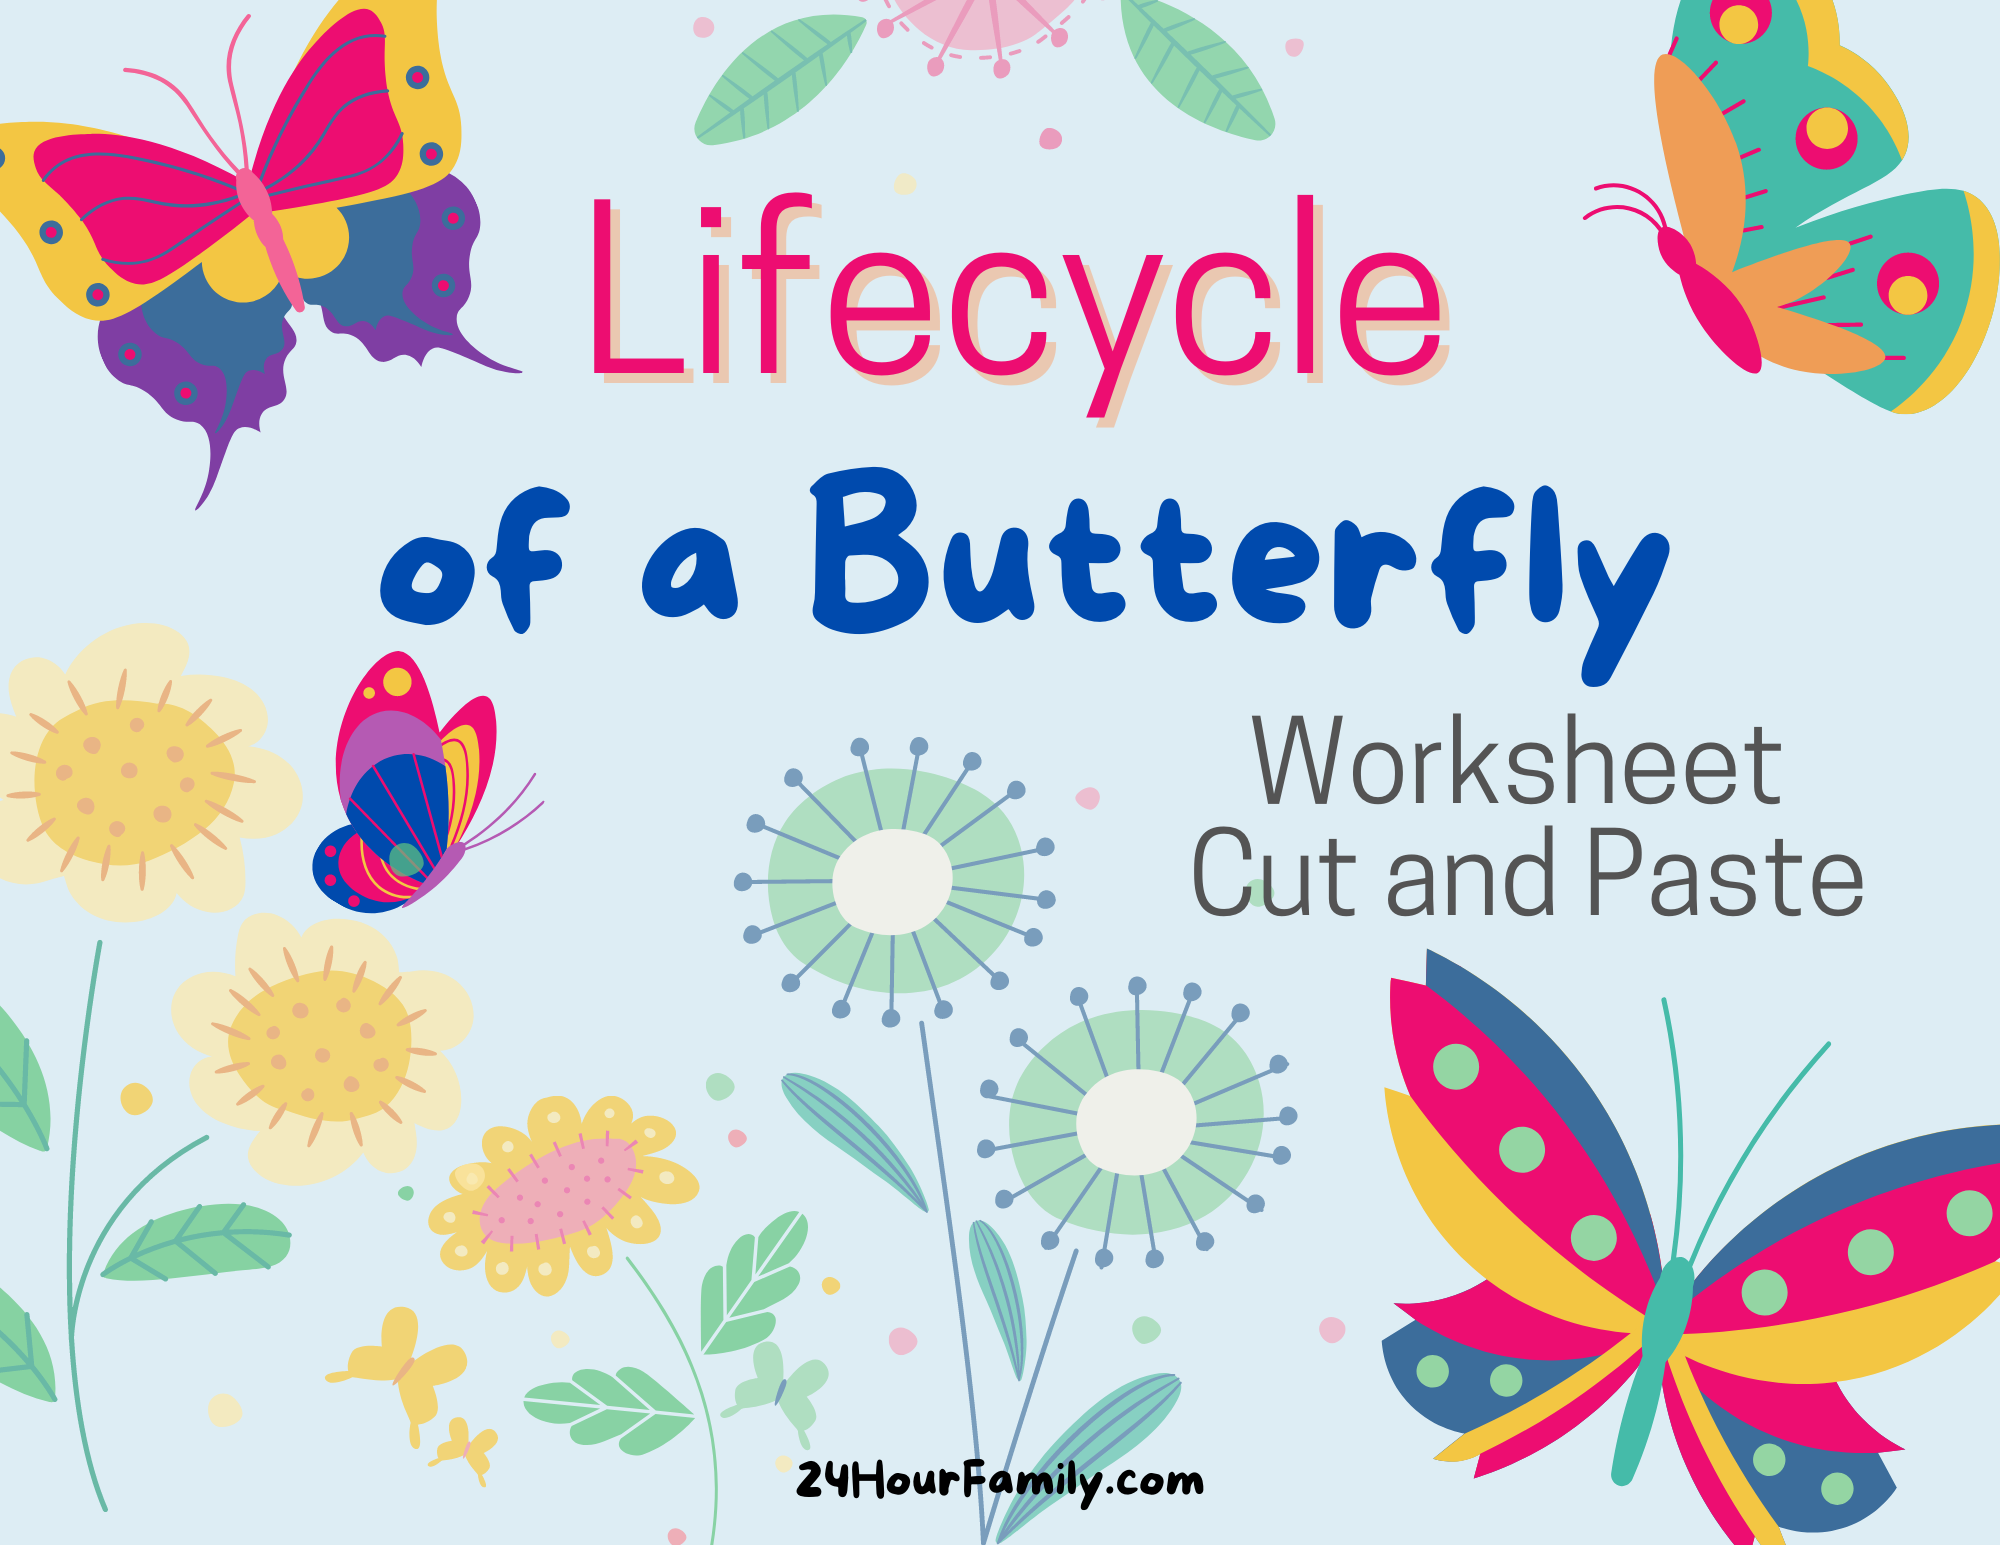 Life Cycle of a Butterfly Cut and Paste Worksheet